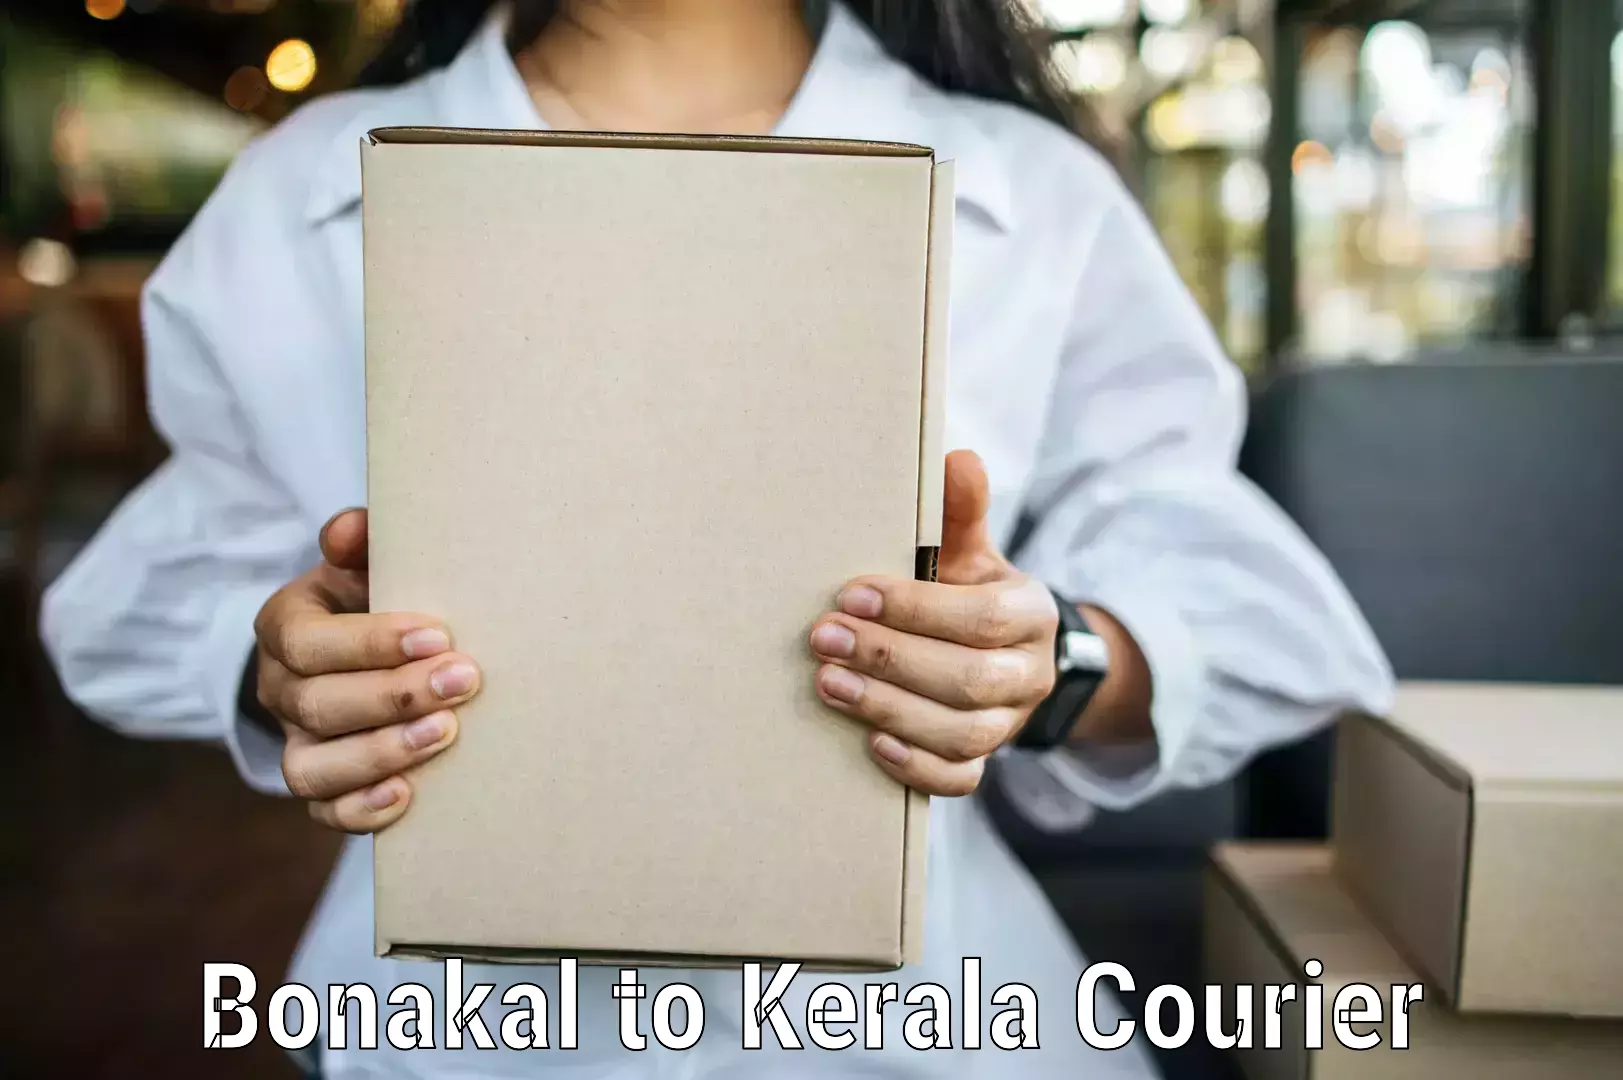 Full-service courier options Bonakal to Cochin University of Science and Technology